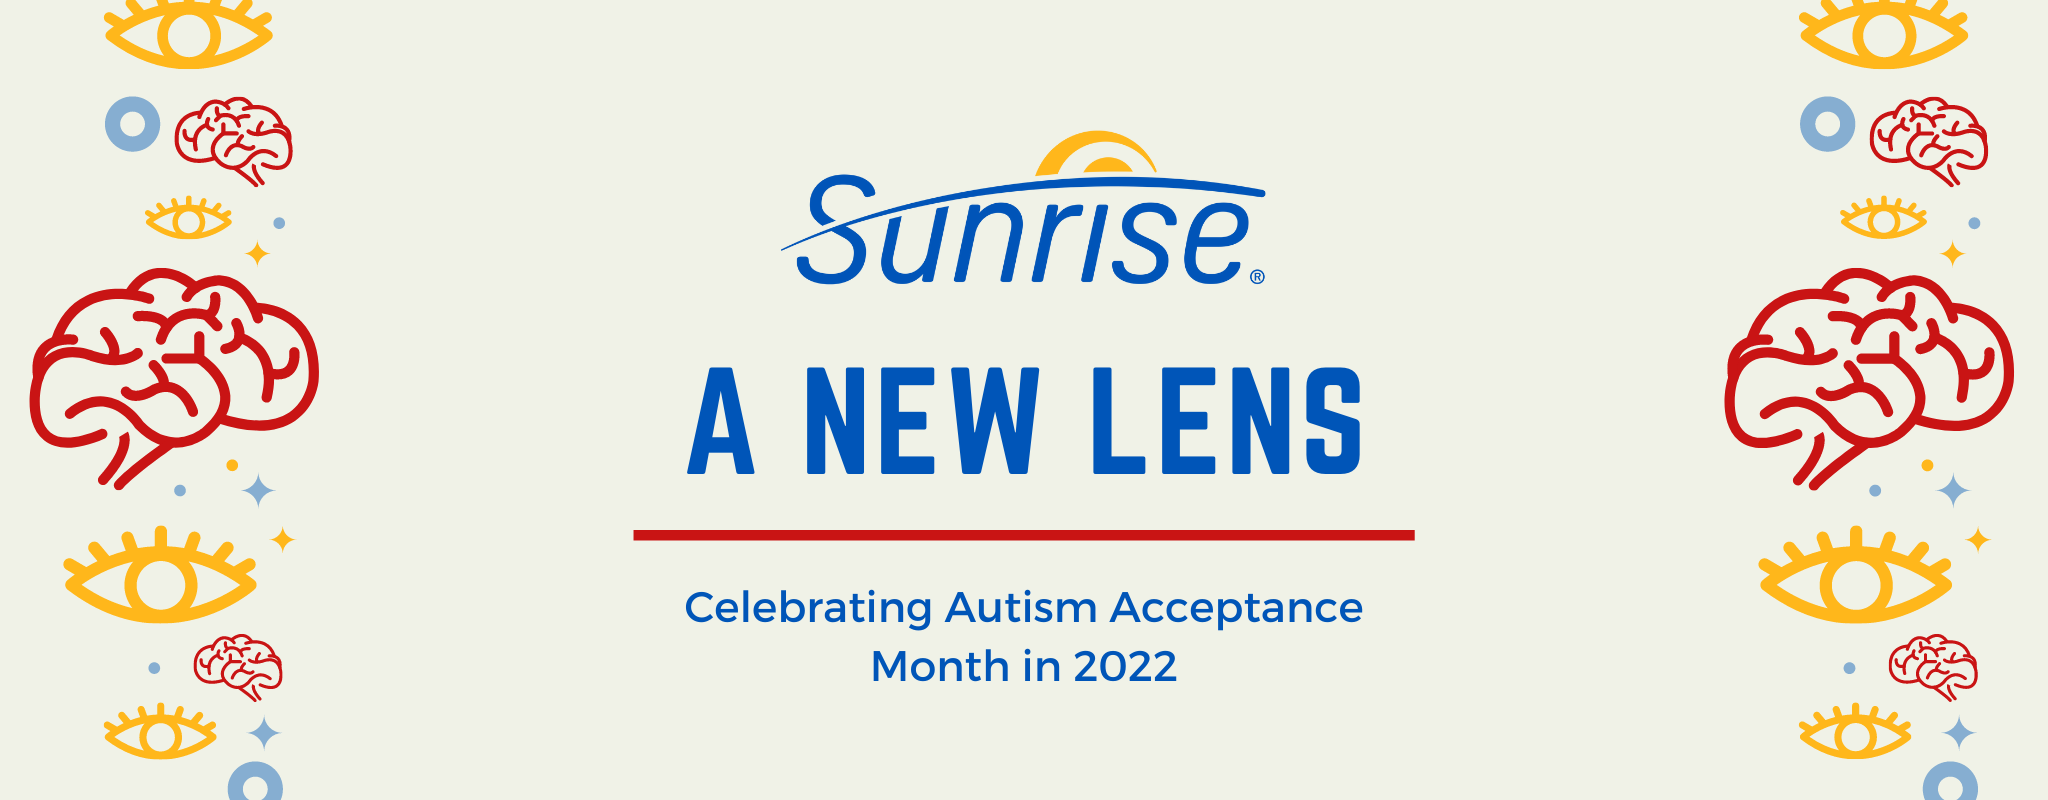 Blog Banner Cover with the Blue Sunrise logo with a yellow accent. The text "A New Lens" is centered in all capital blue letters. Below it is a red line with the text "celebrating autism acceptance month in 2022" below.